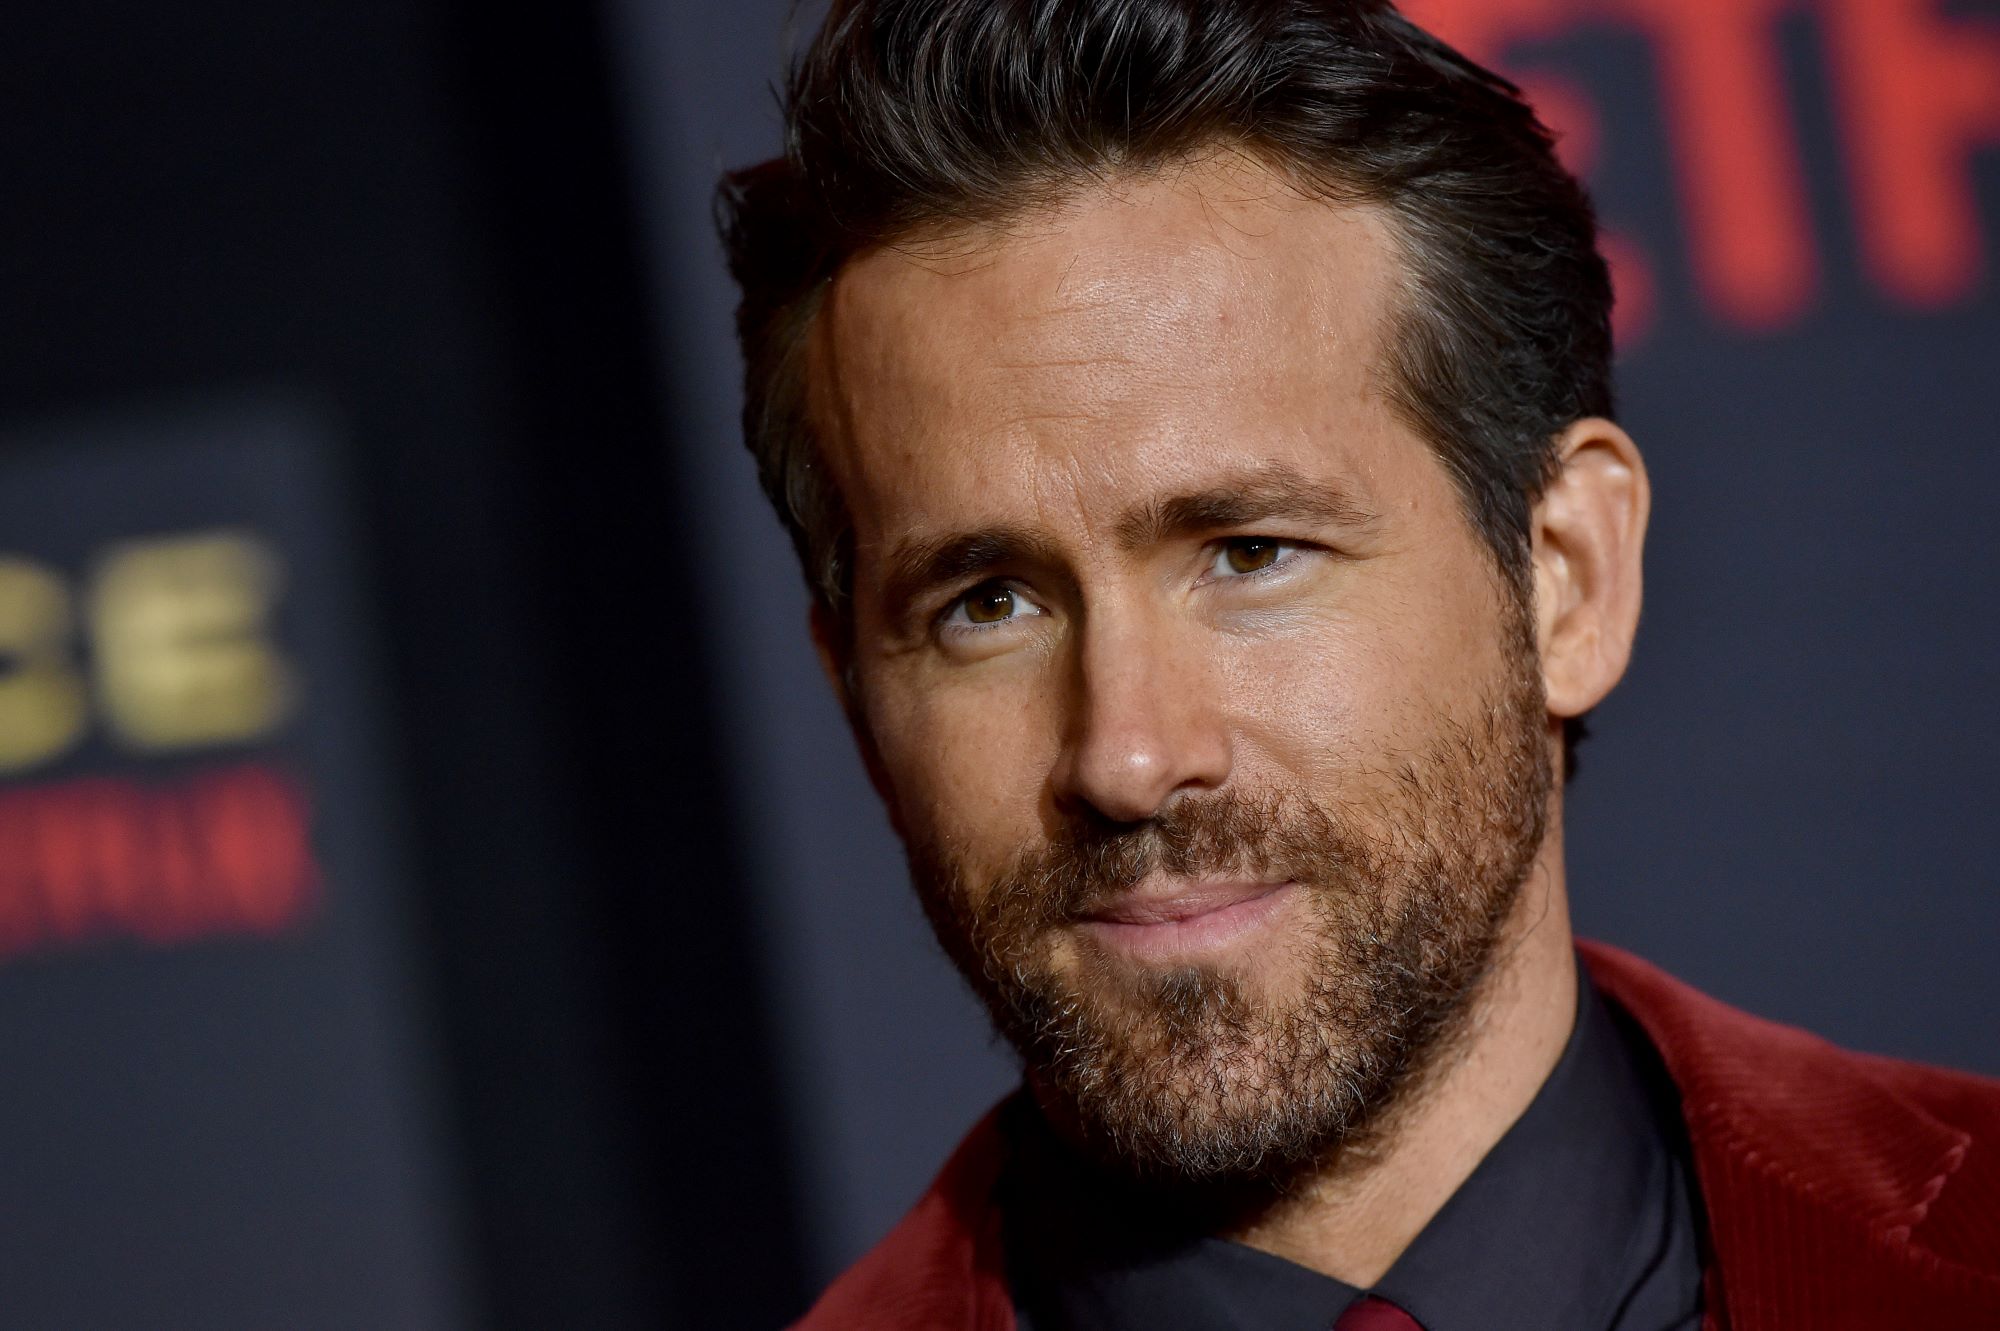 'Deadpool' star Ryan Reynolds, who denies he's in 'Doctor Strange in the Multiverse of Madness,' wears a red suit over a dark gray button-up shirt and red tie.